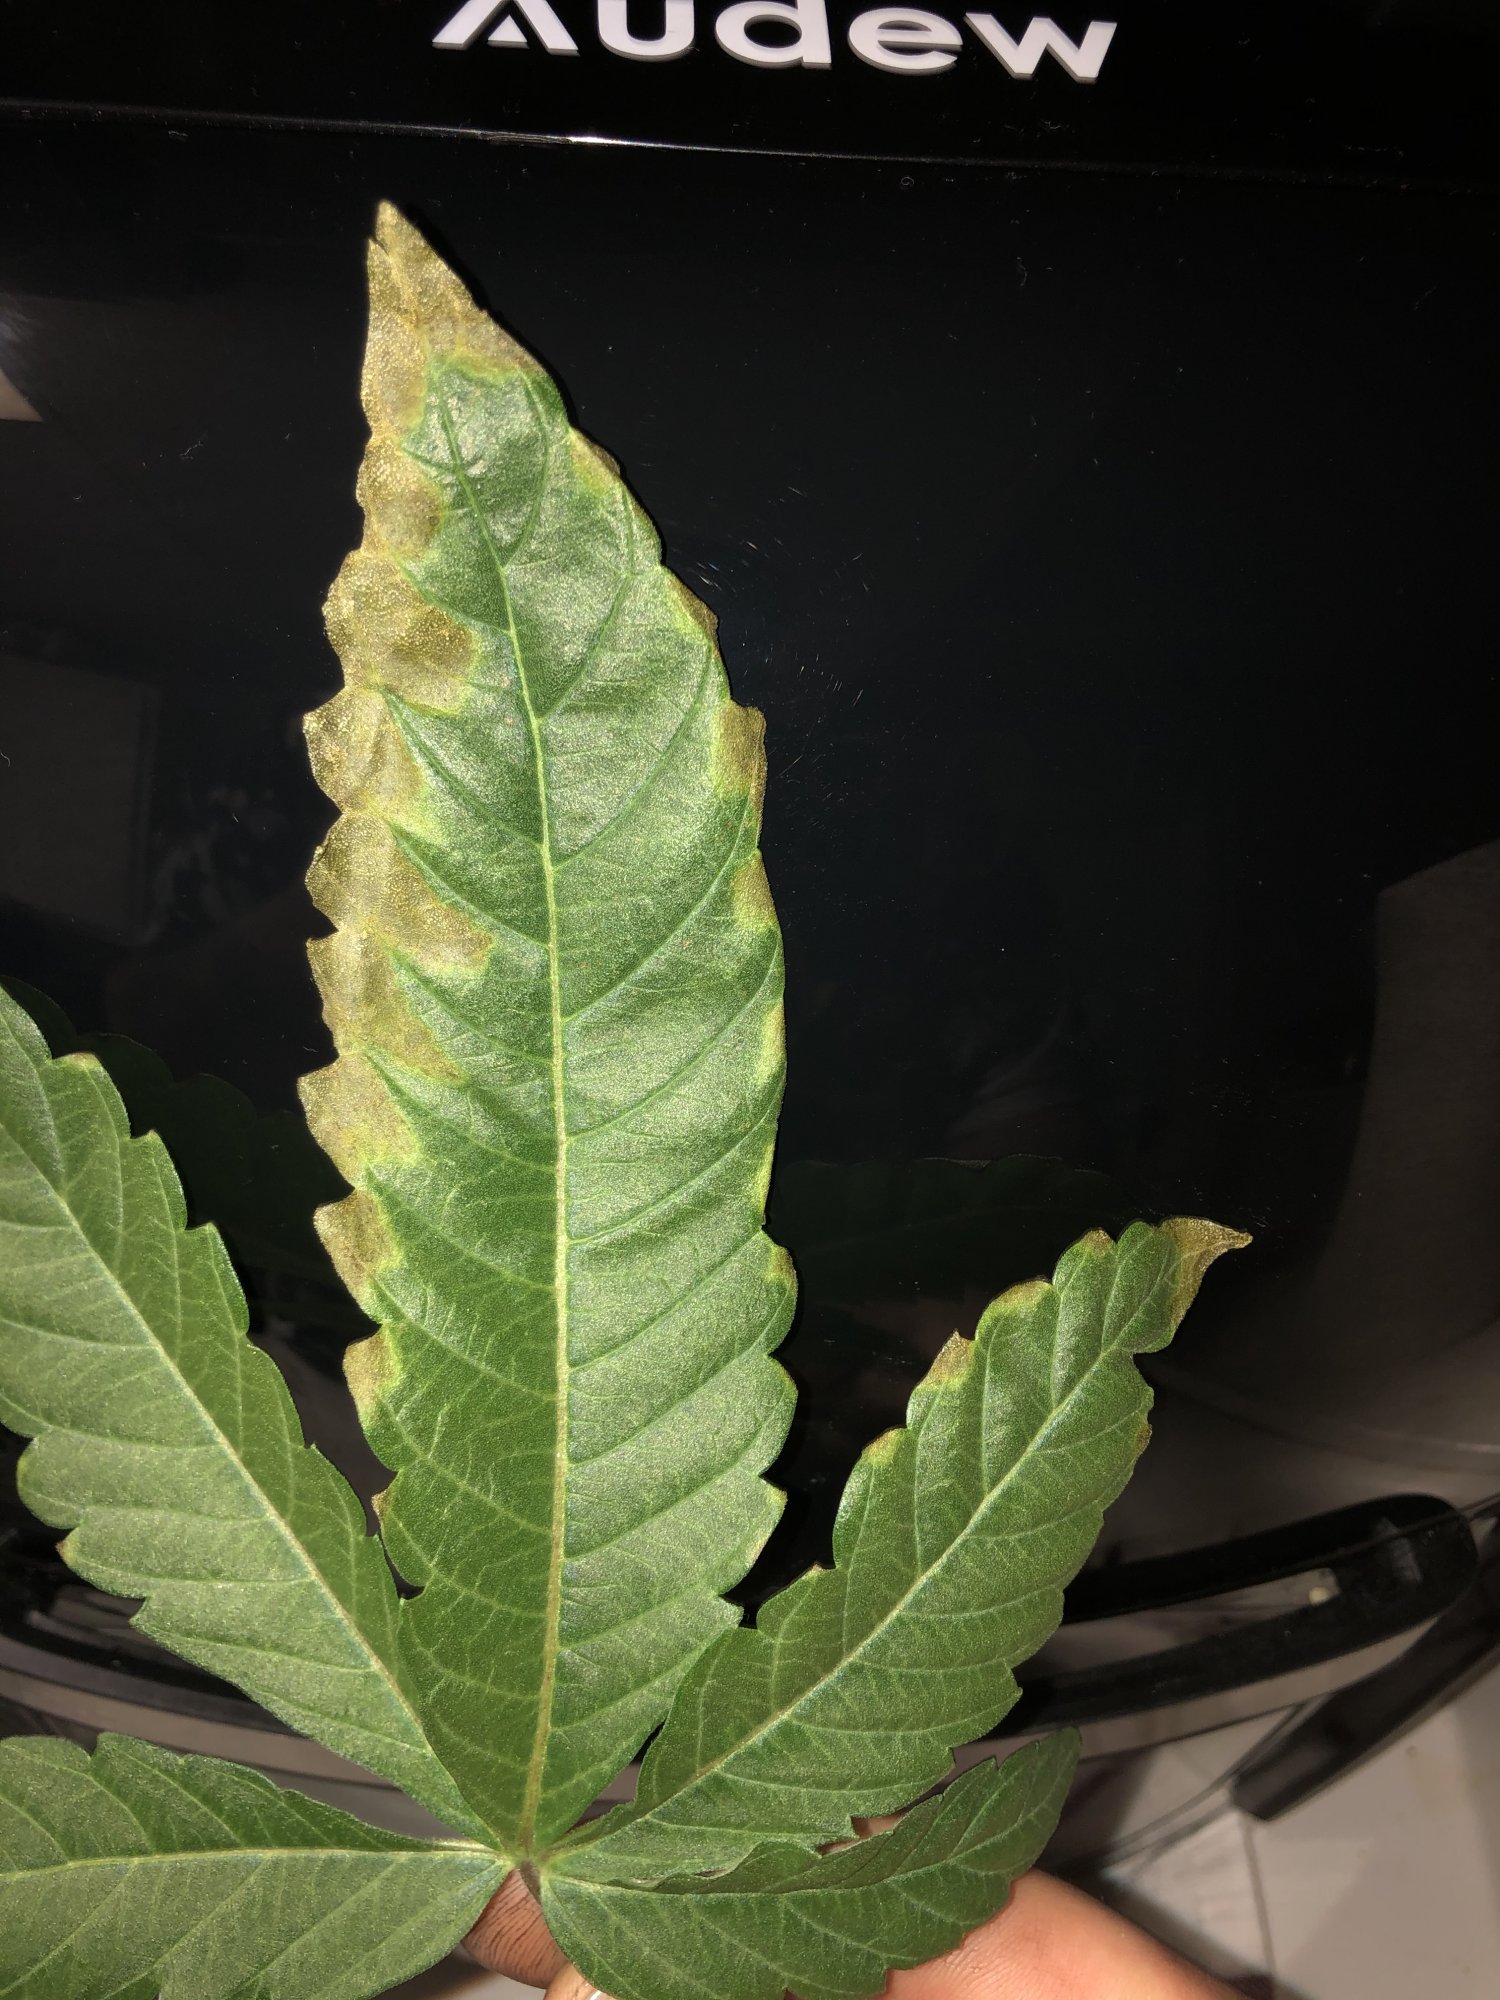 Is this leaf just dying off naturally or is there something else going on 2